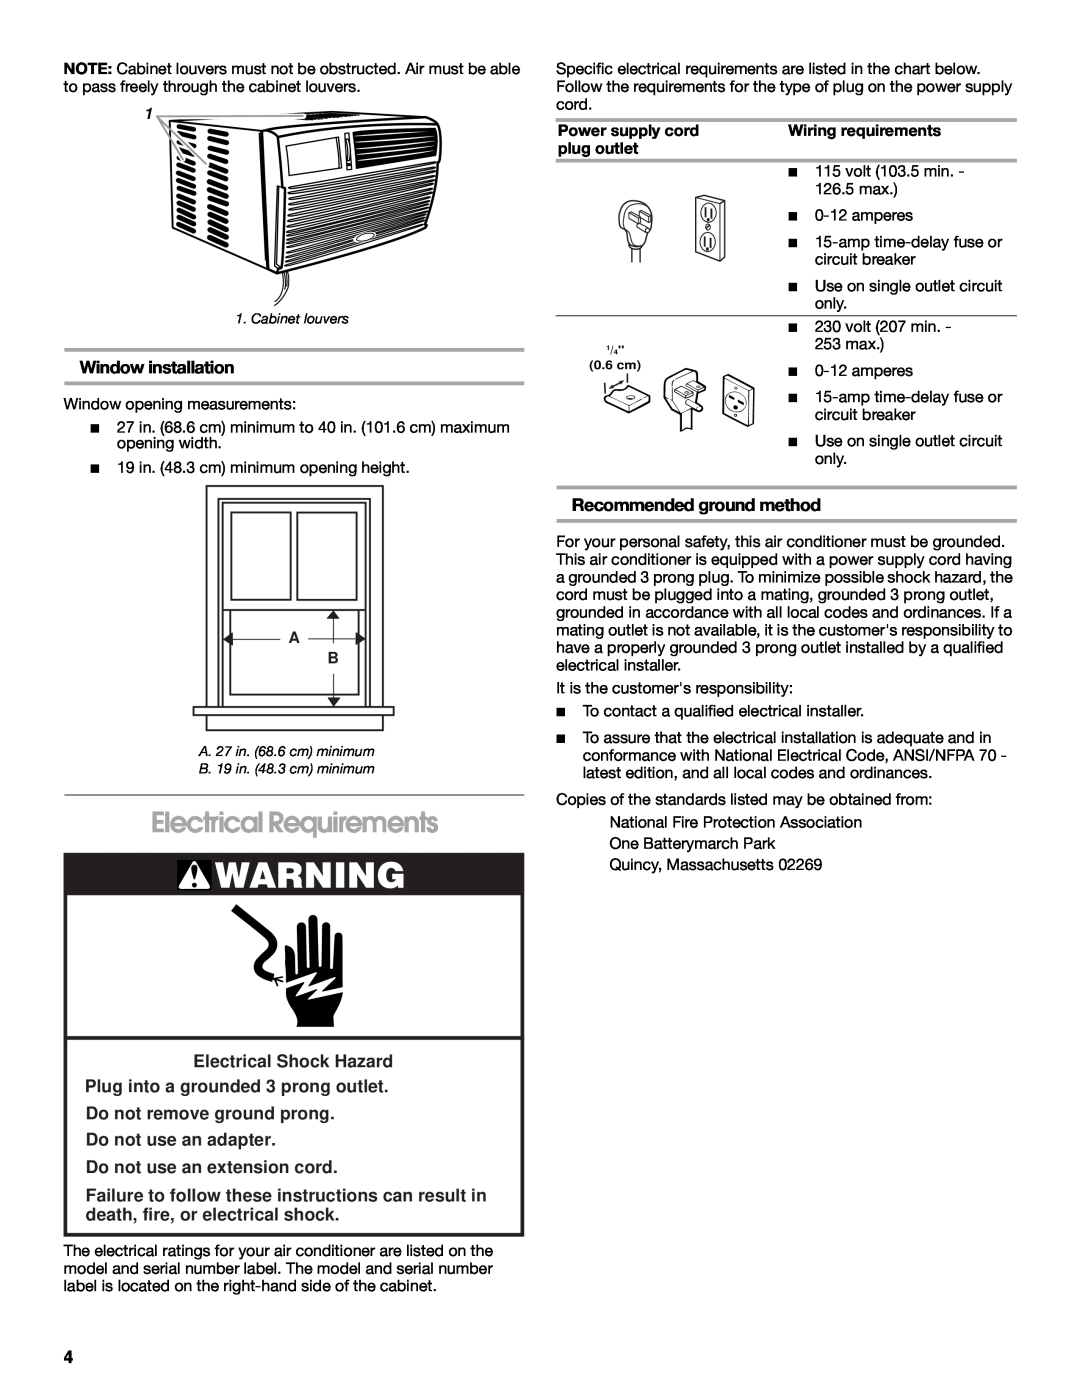 Whirlpool 1187361 Electrical Requirements, Window installation, Electrical Shock Hazard, Do not use an extension cord 